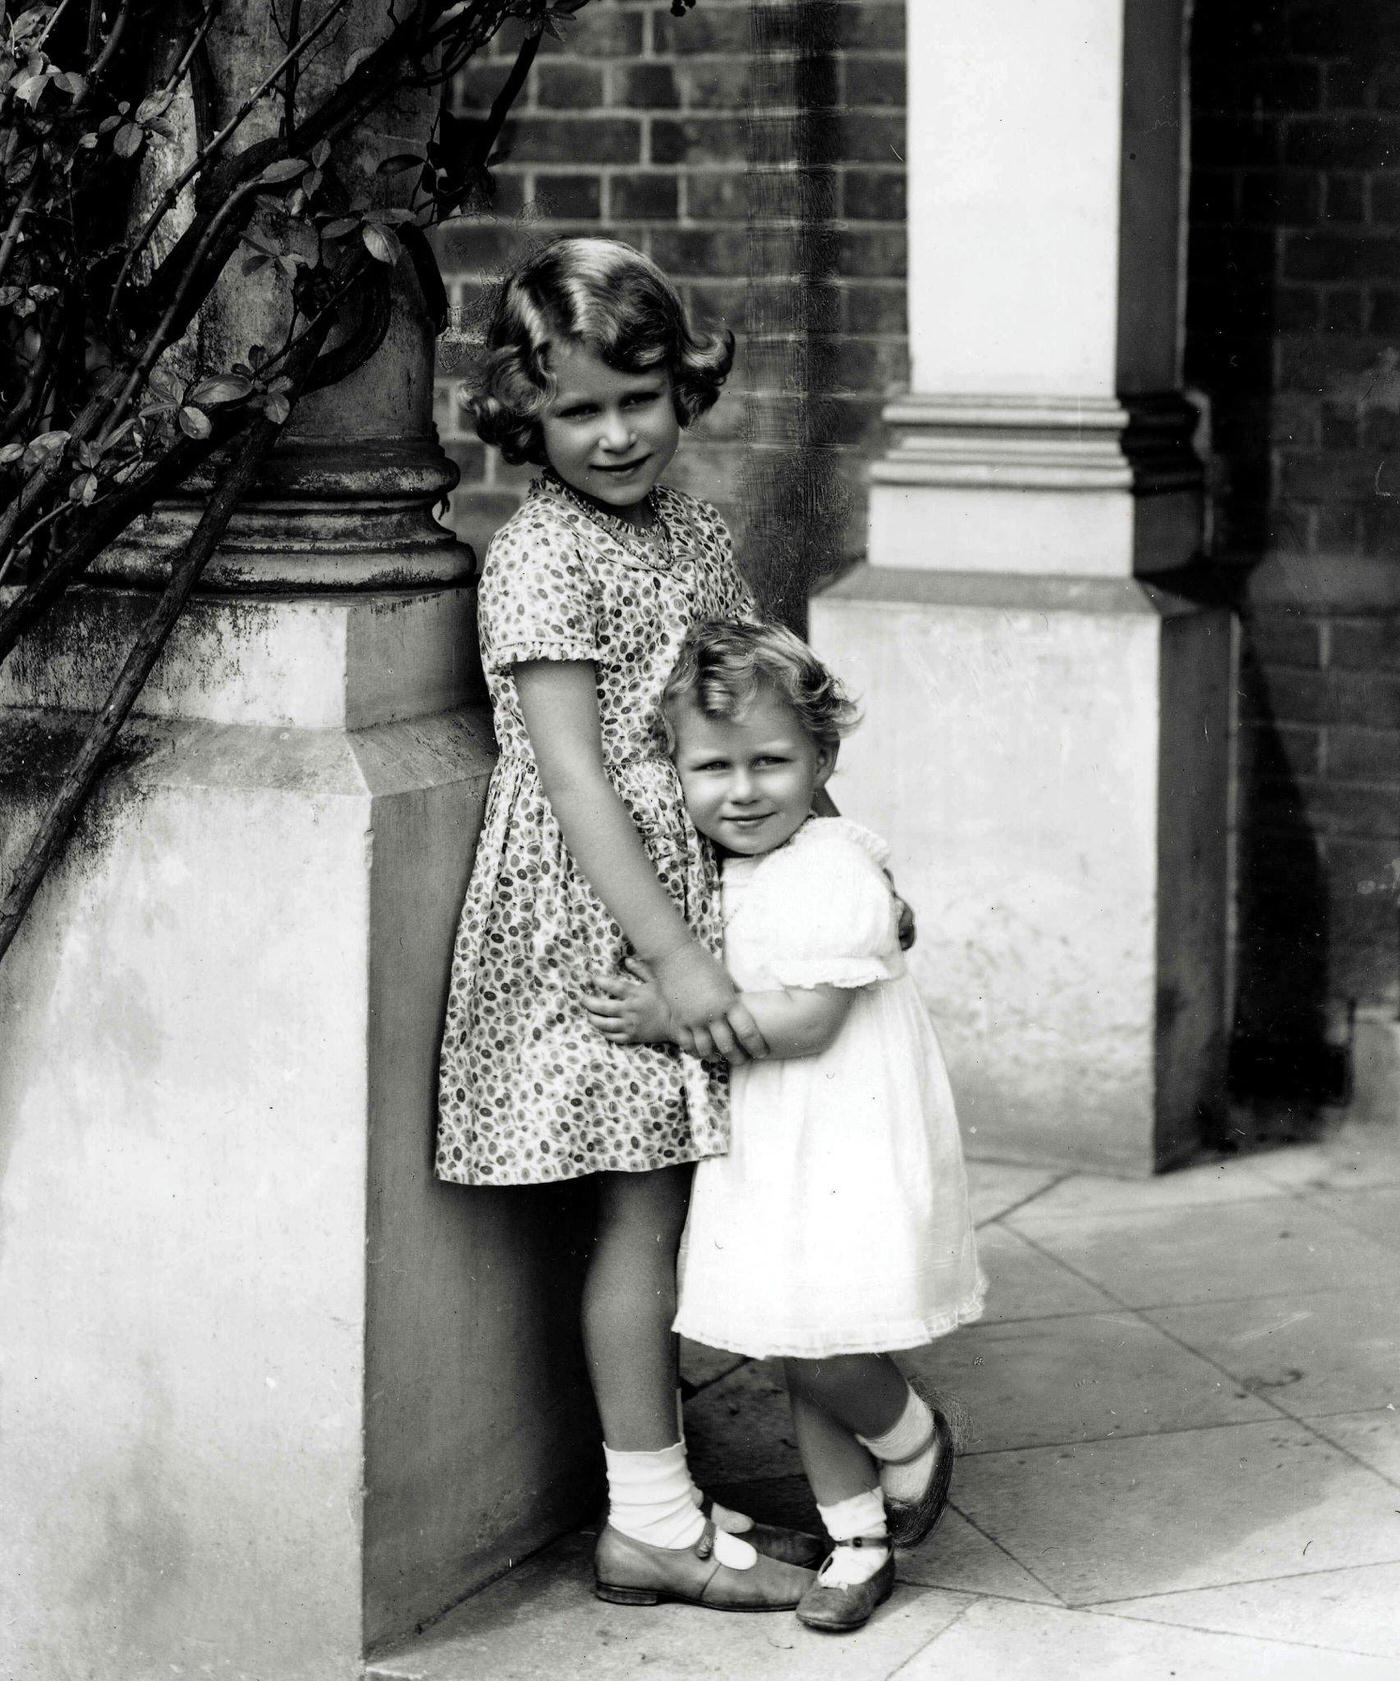 A young Princess Elizabeth, later Queen Elizabeth II, and her sister Princess Margaret, 1932